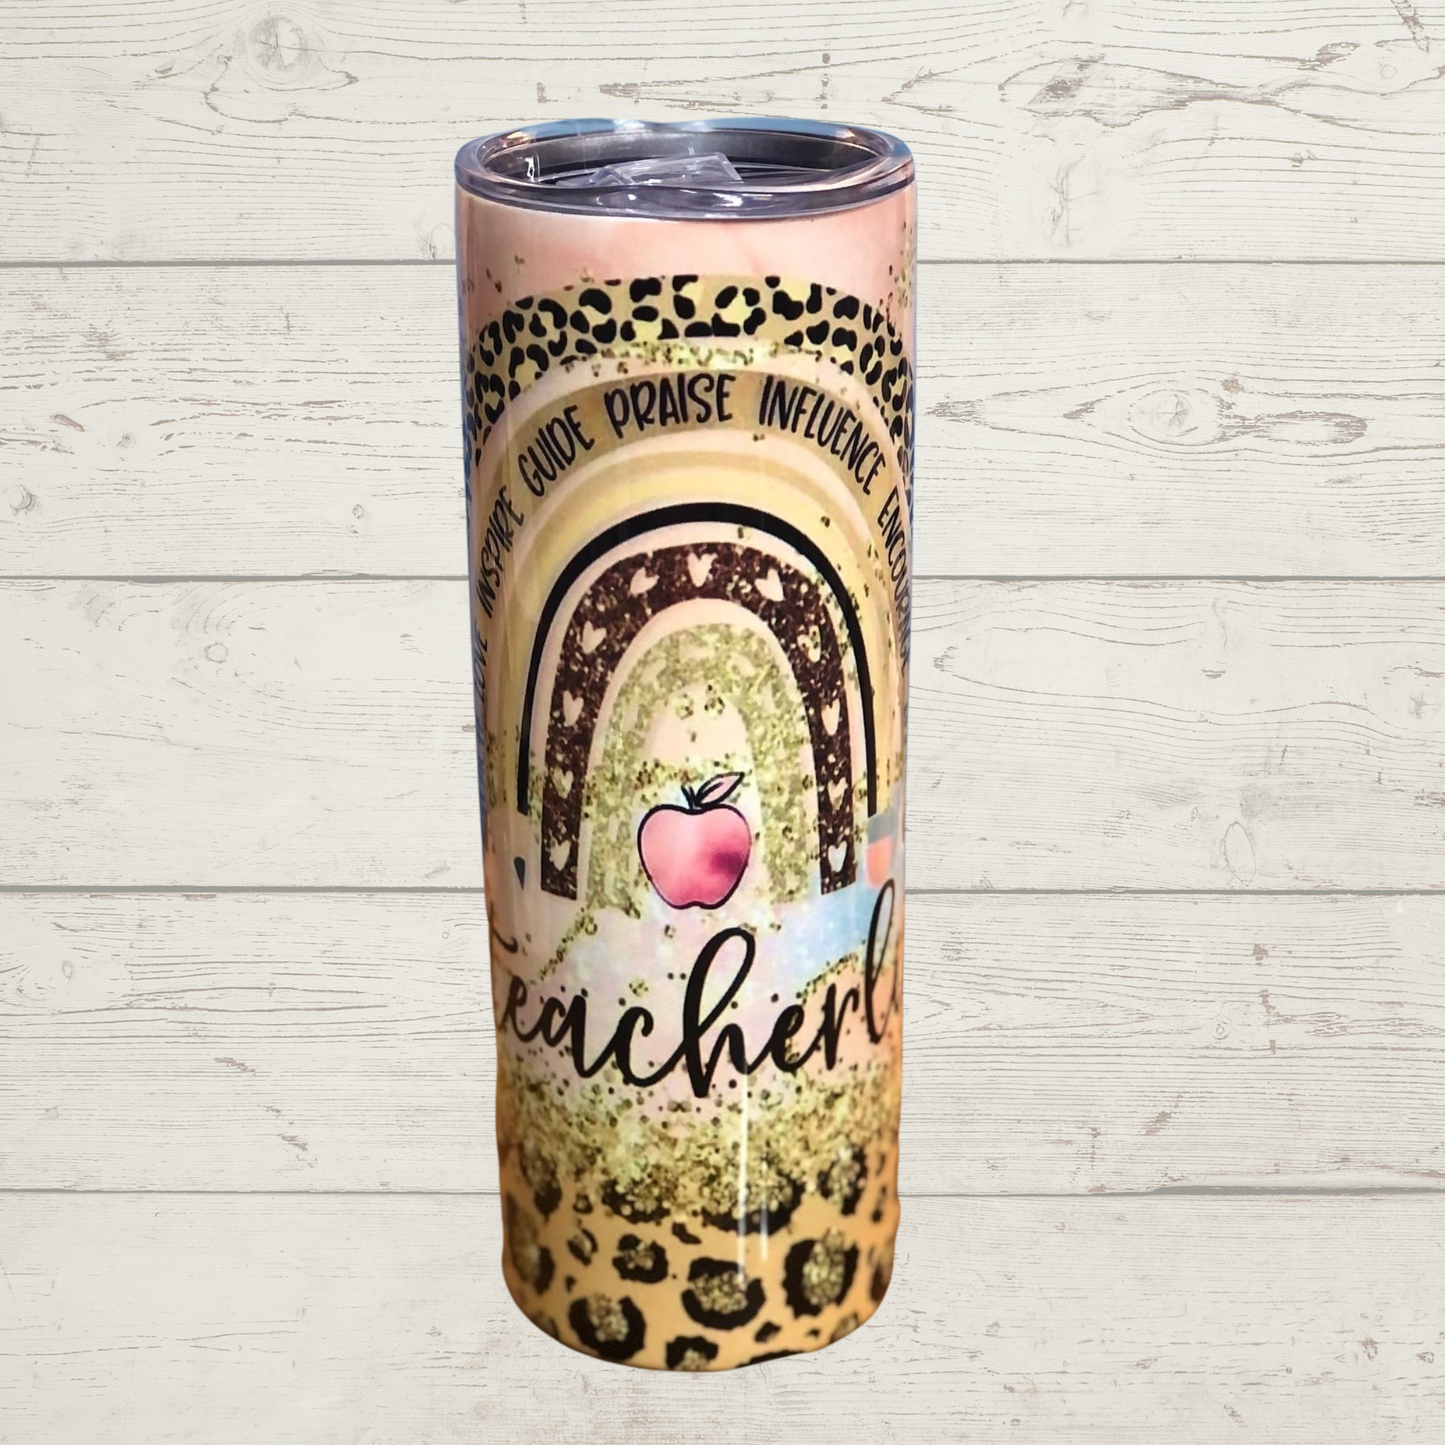 20 oz #TeacherLife Sublimation Tumbler with Quality Sealing Lid and Stainless Steel Straw, Teach Love Inspire Guide Praise Influence Encourage Listen Leopard Print Hearts Rainbow Pink Gold Glitter 